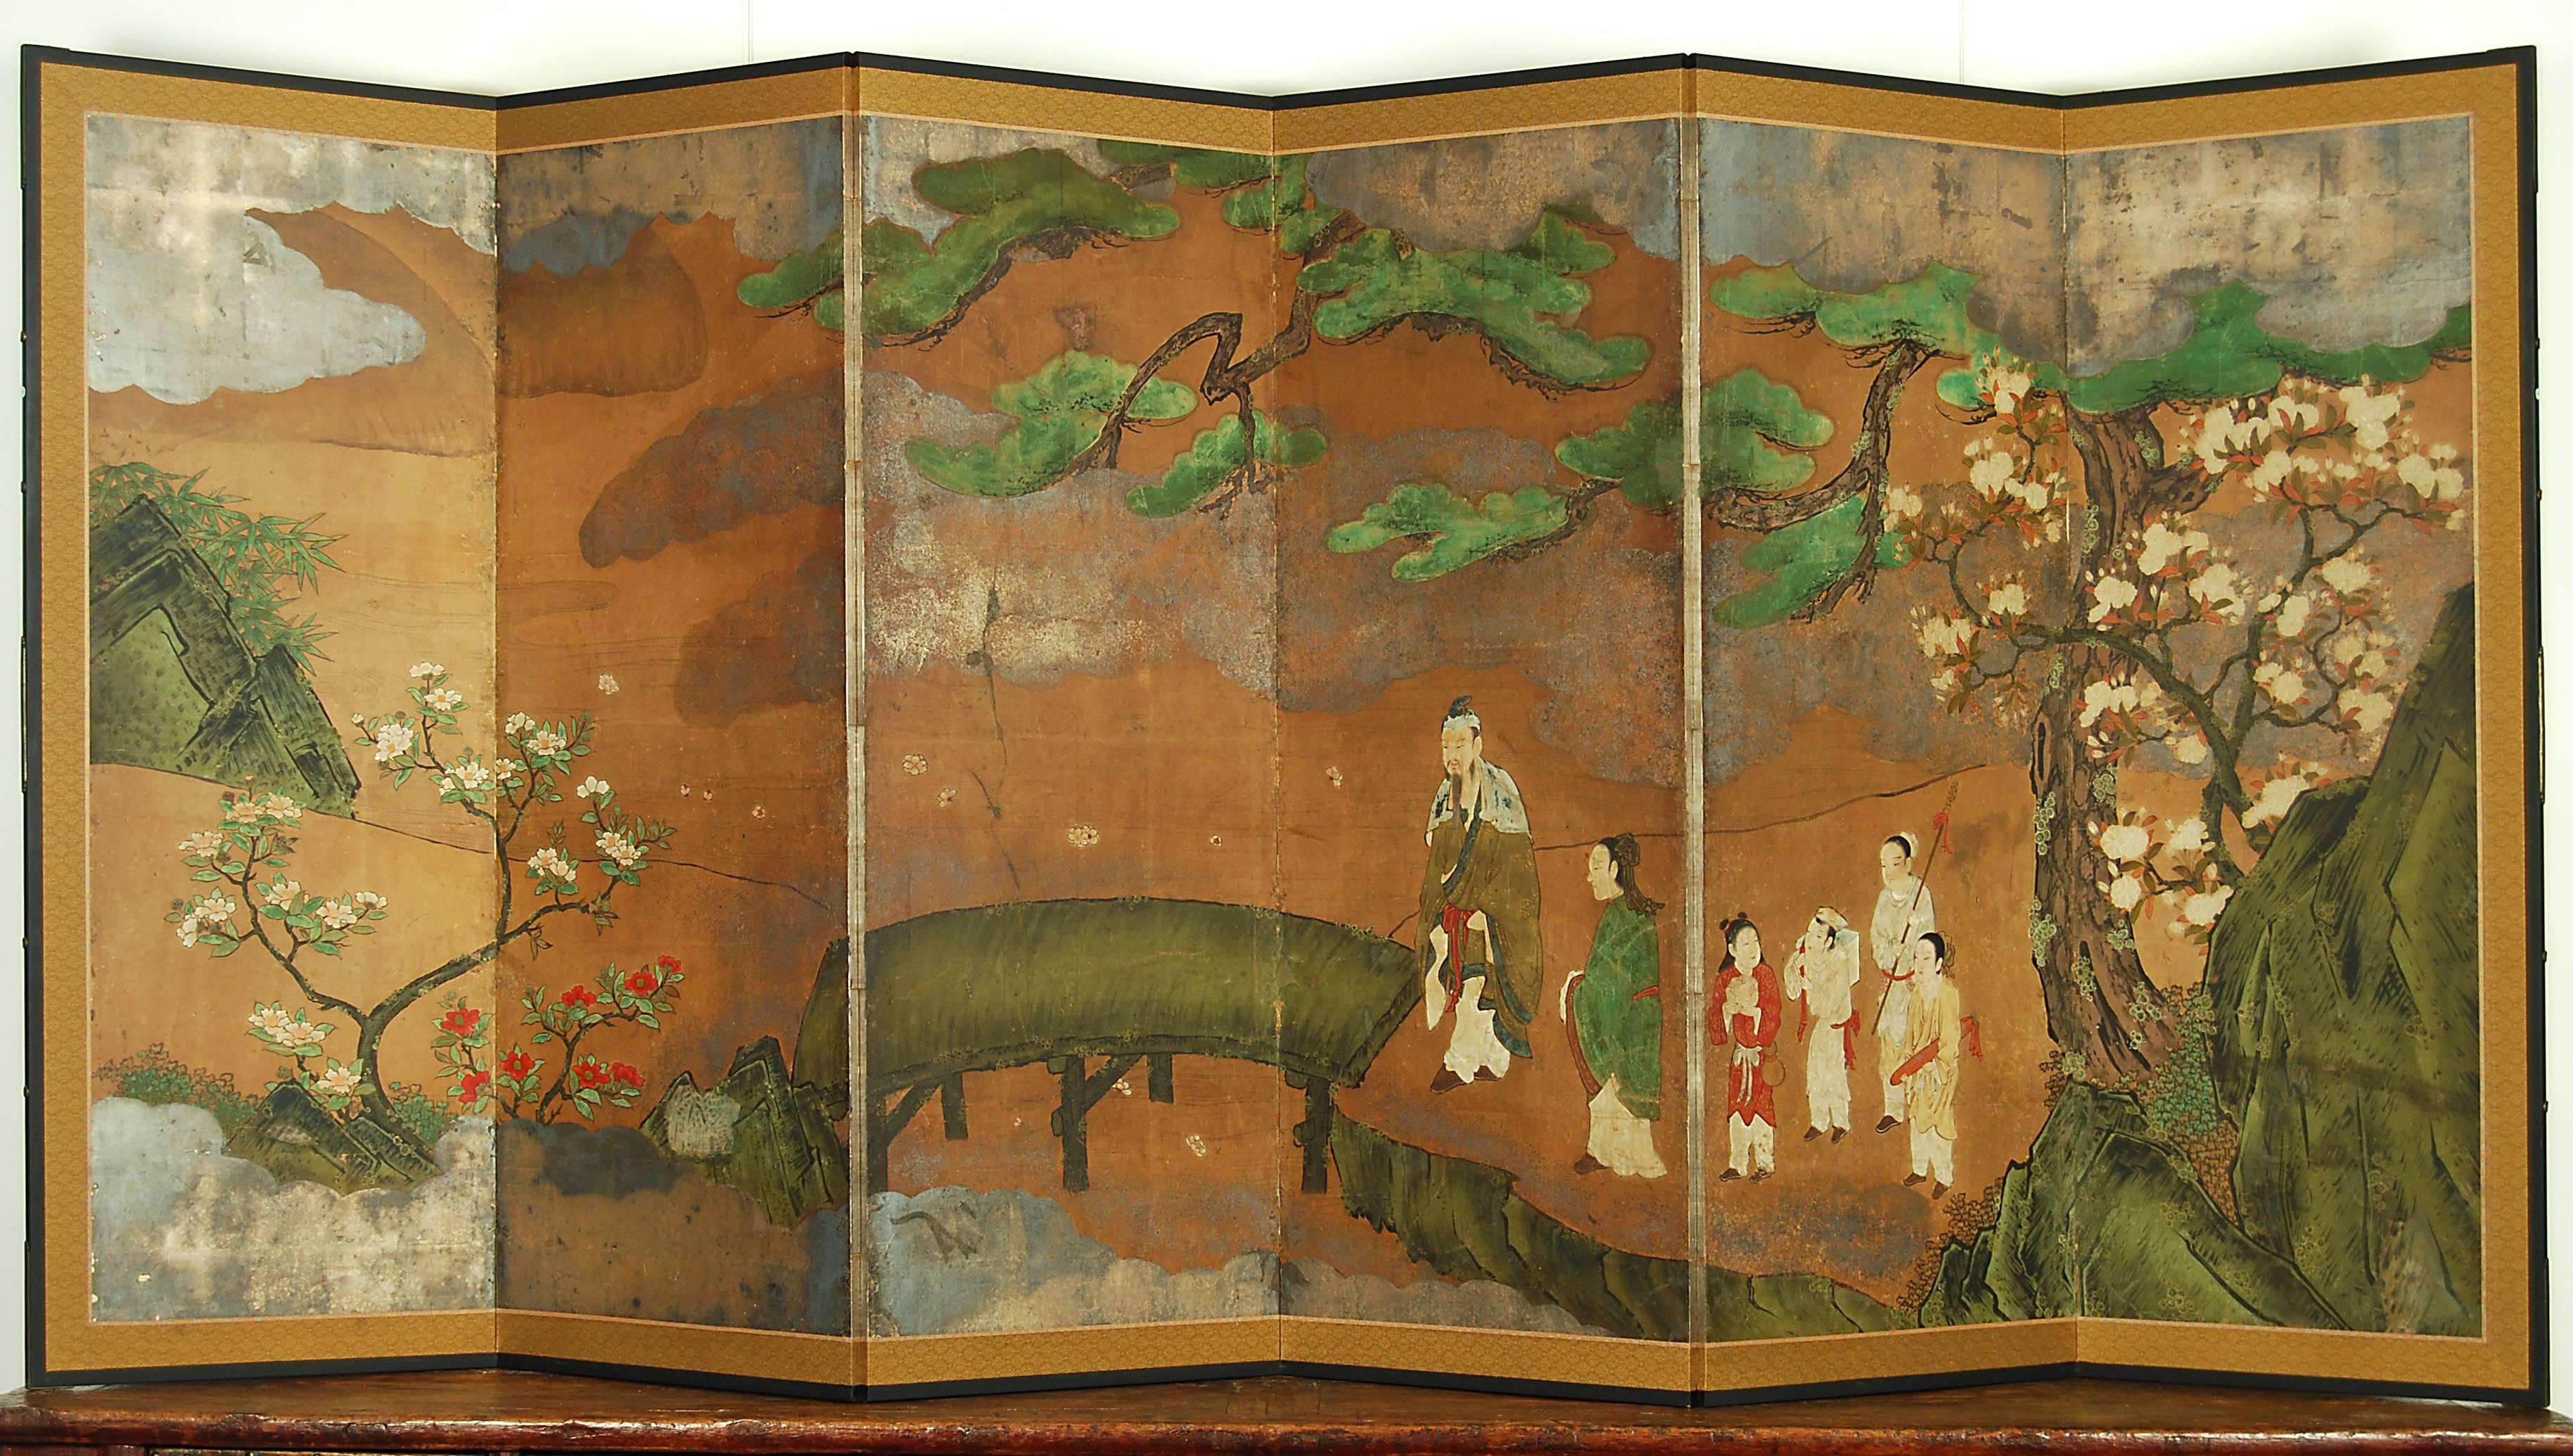 Japanese Kano school screen with pine tree, camellias, cherry blossom and Chinese figures in the landscape, circa 18th century.

Materials: Pigment colors and oxidized silver leaf on paper

Dimensions: H 170cm x W 373cm.